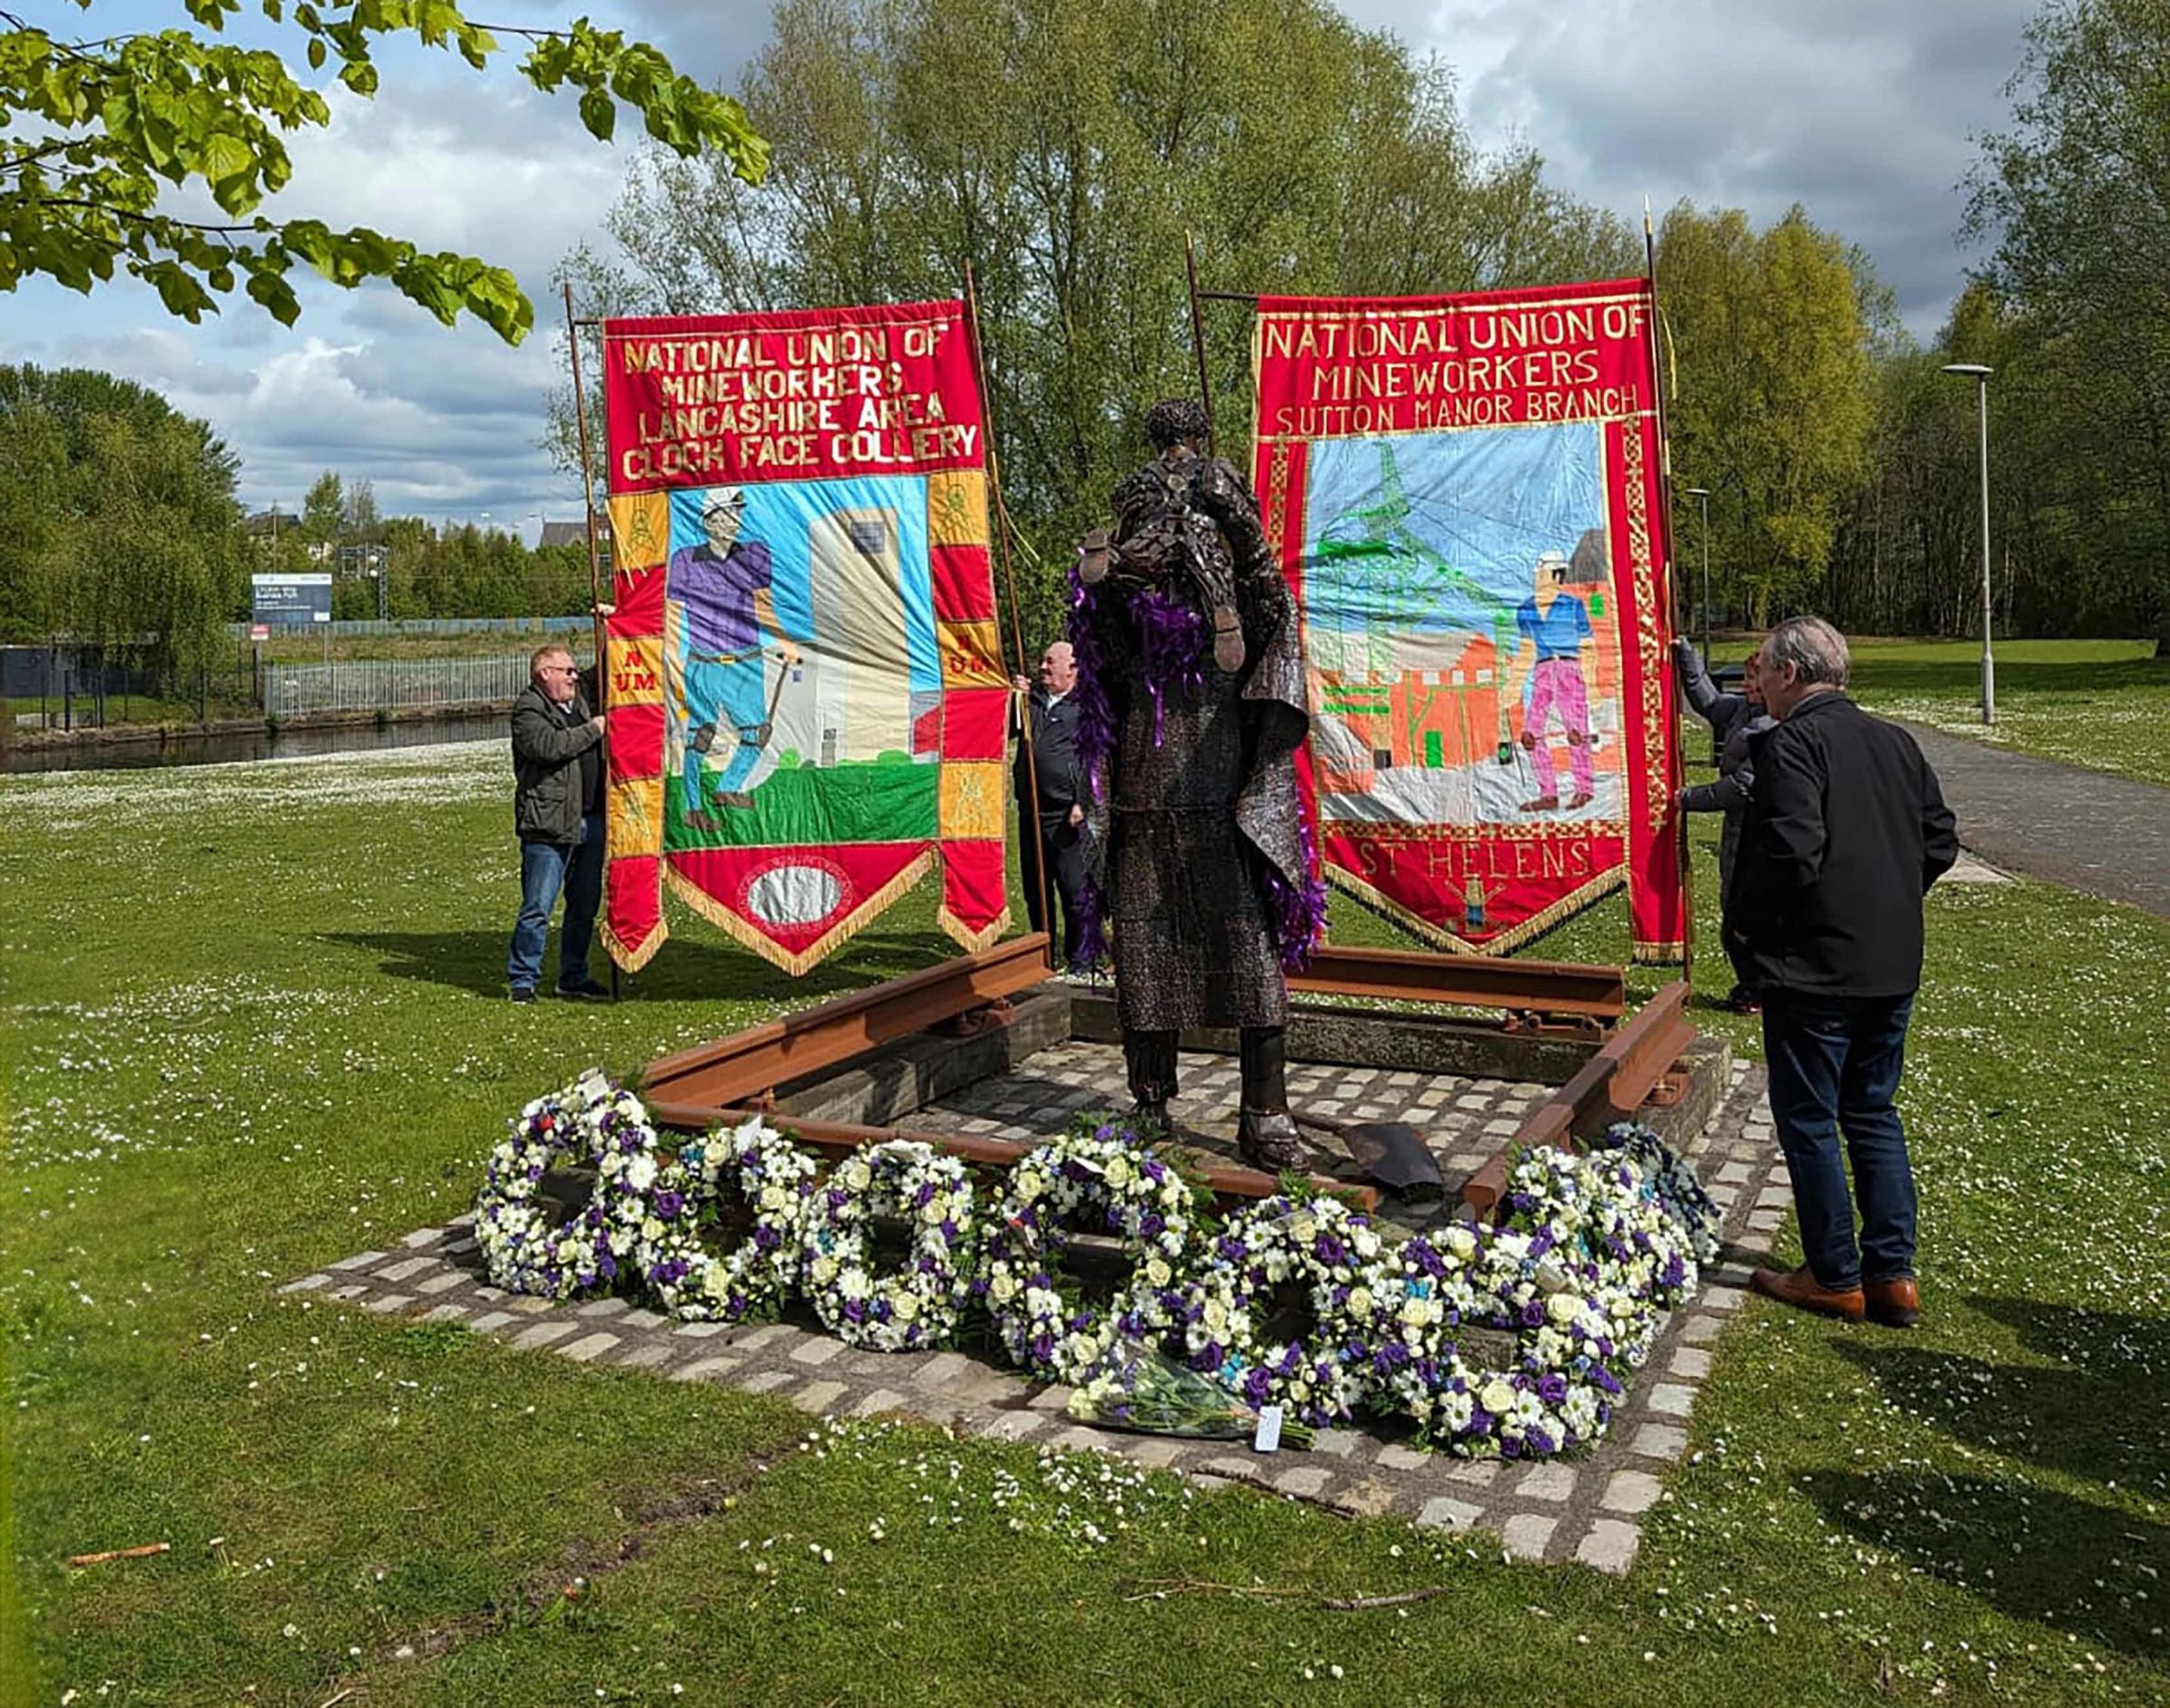 The Northwest Miners Association banners Picture: Stan Riley